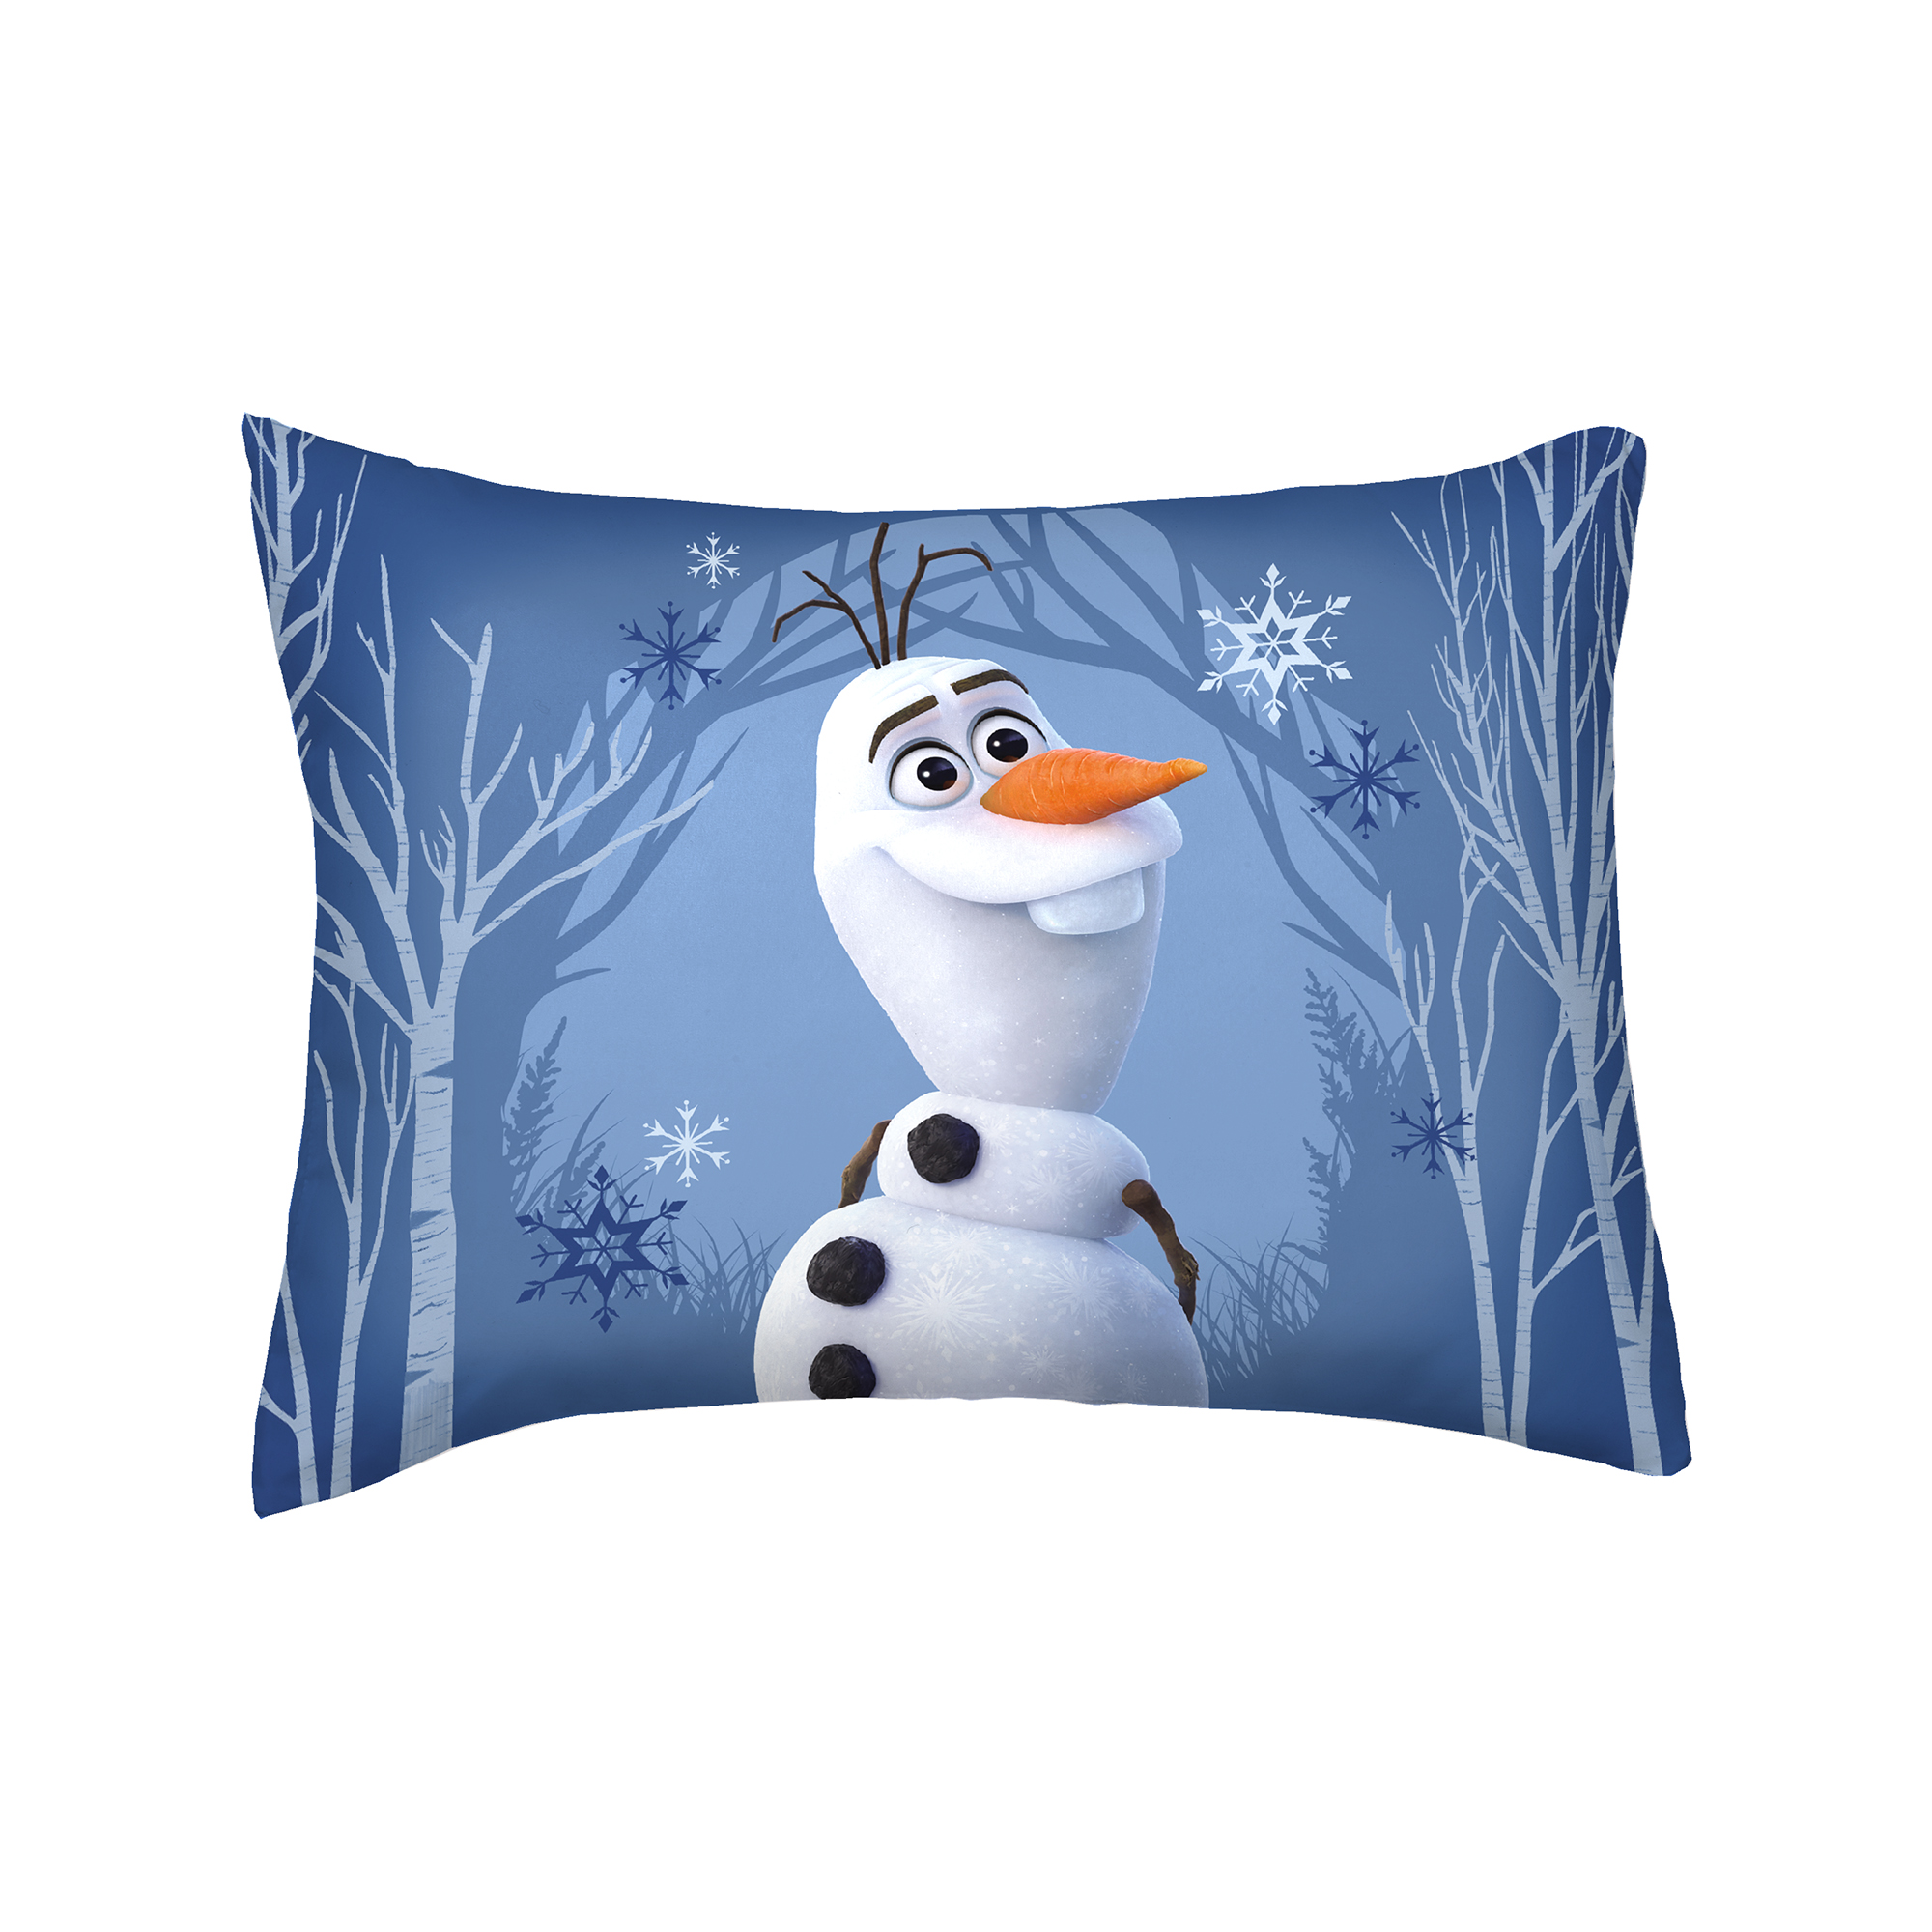 Disney Frozen Olaf Kids Comforter and Sham, 2-Piece Set, Twin/Full, Reversible, Gray - image 5 of 15